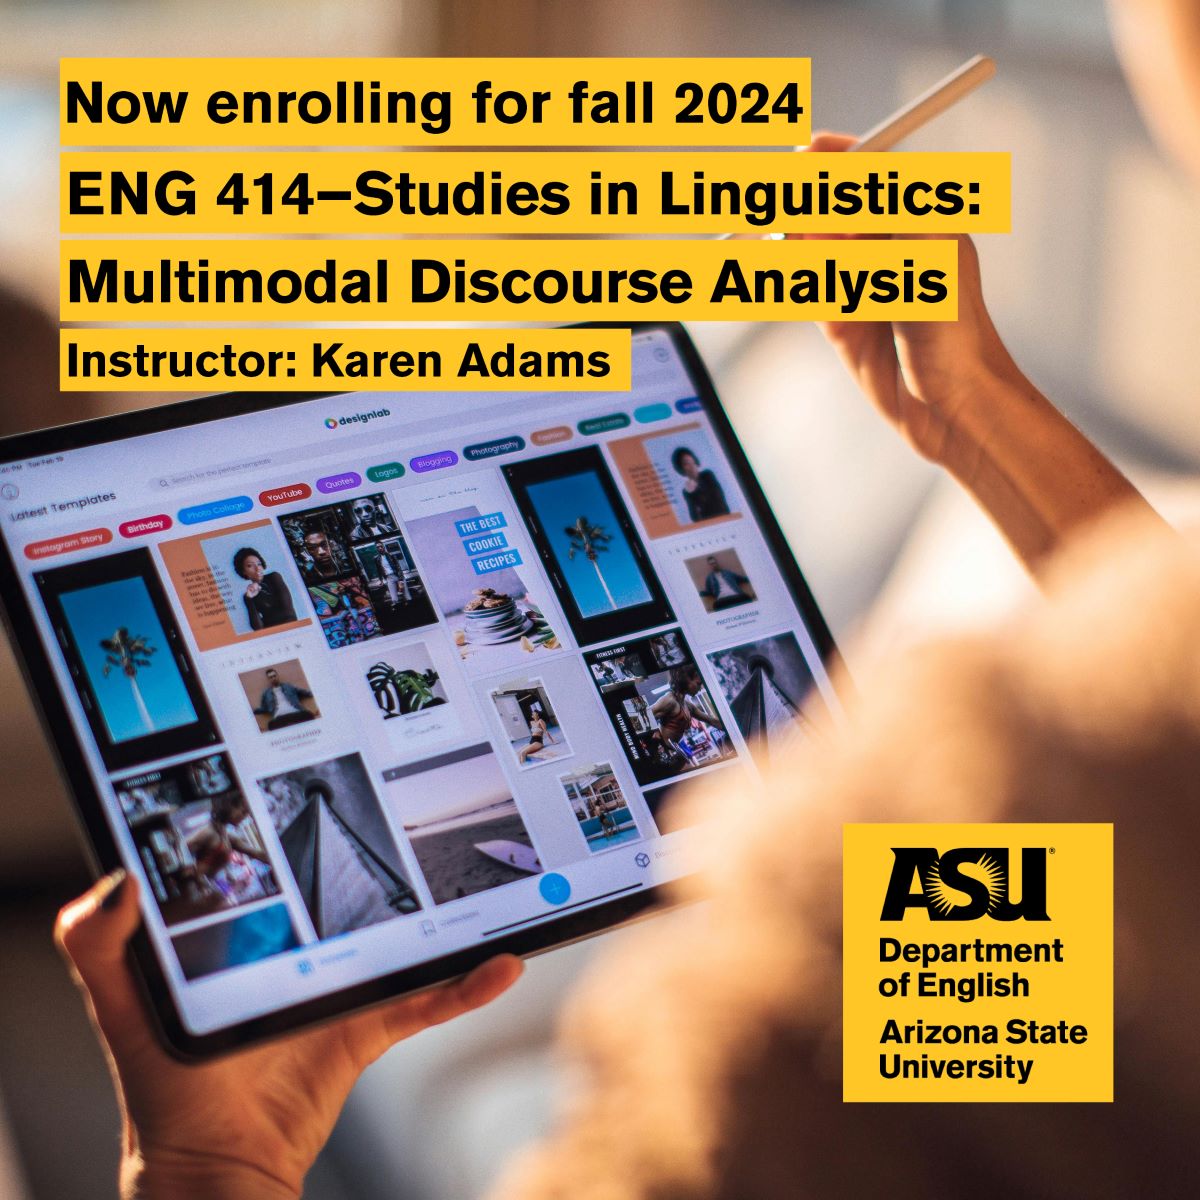 Unlock 🔓🔑 communication secrets in @ASU's fall '24 @ASULinguists course—ENG 414: Multimodal Discourse Analysis. Learn how words, gestures, color & images create meaning in digital spaces, the classroom, fashion, gaming & more. Register: ow.ly/YXOg50ROfWR #ASUHumanities